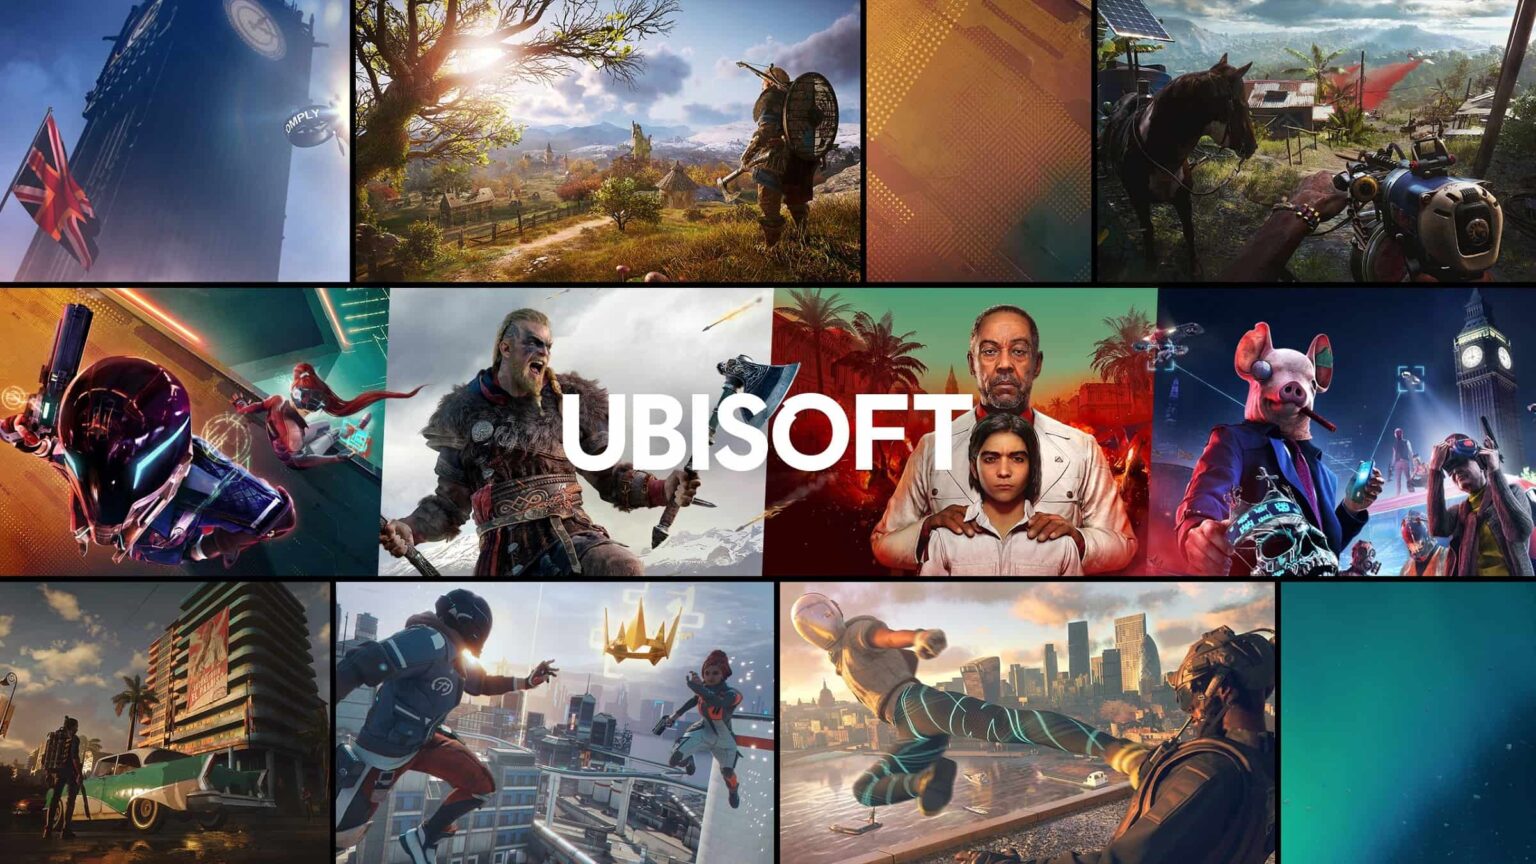 Do you have an Ubisoft account? You may end up deleting it once you wade through the disheartening allegations against the company's workplace culture.